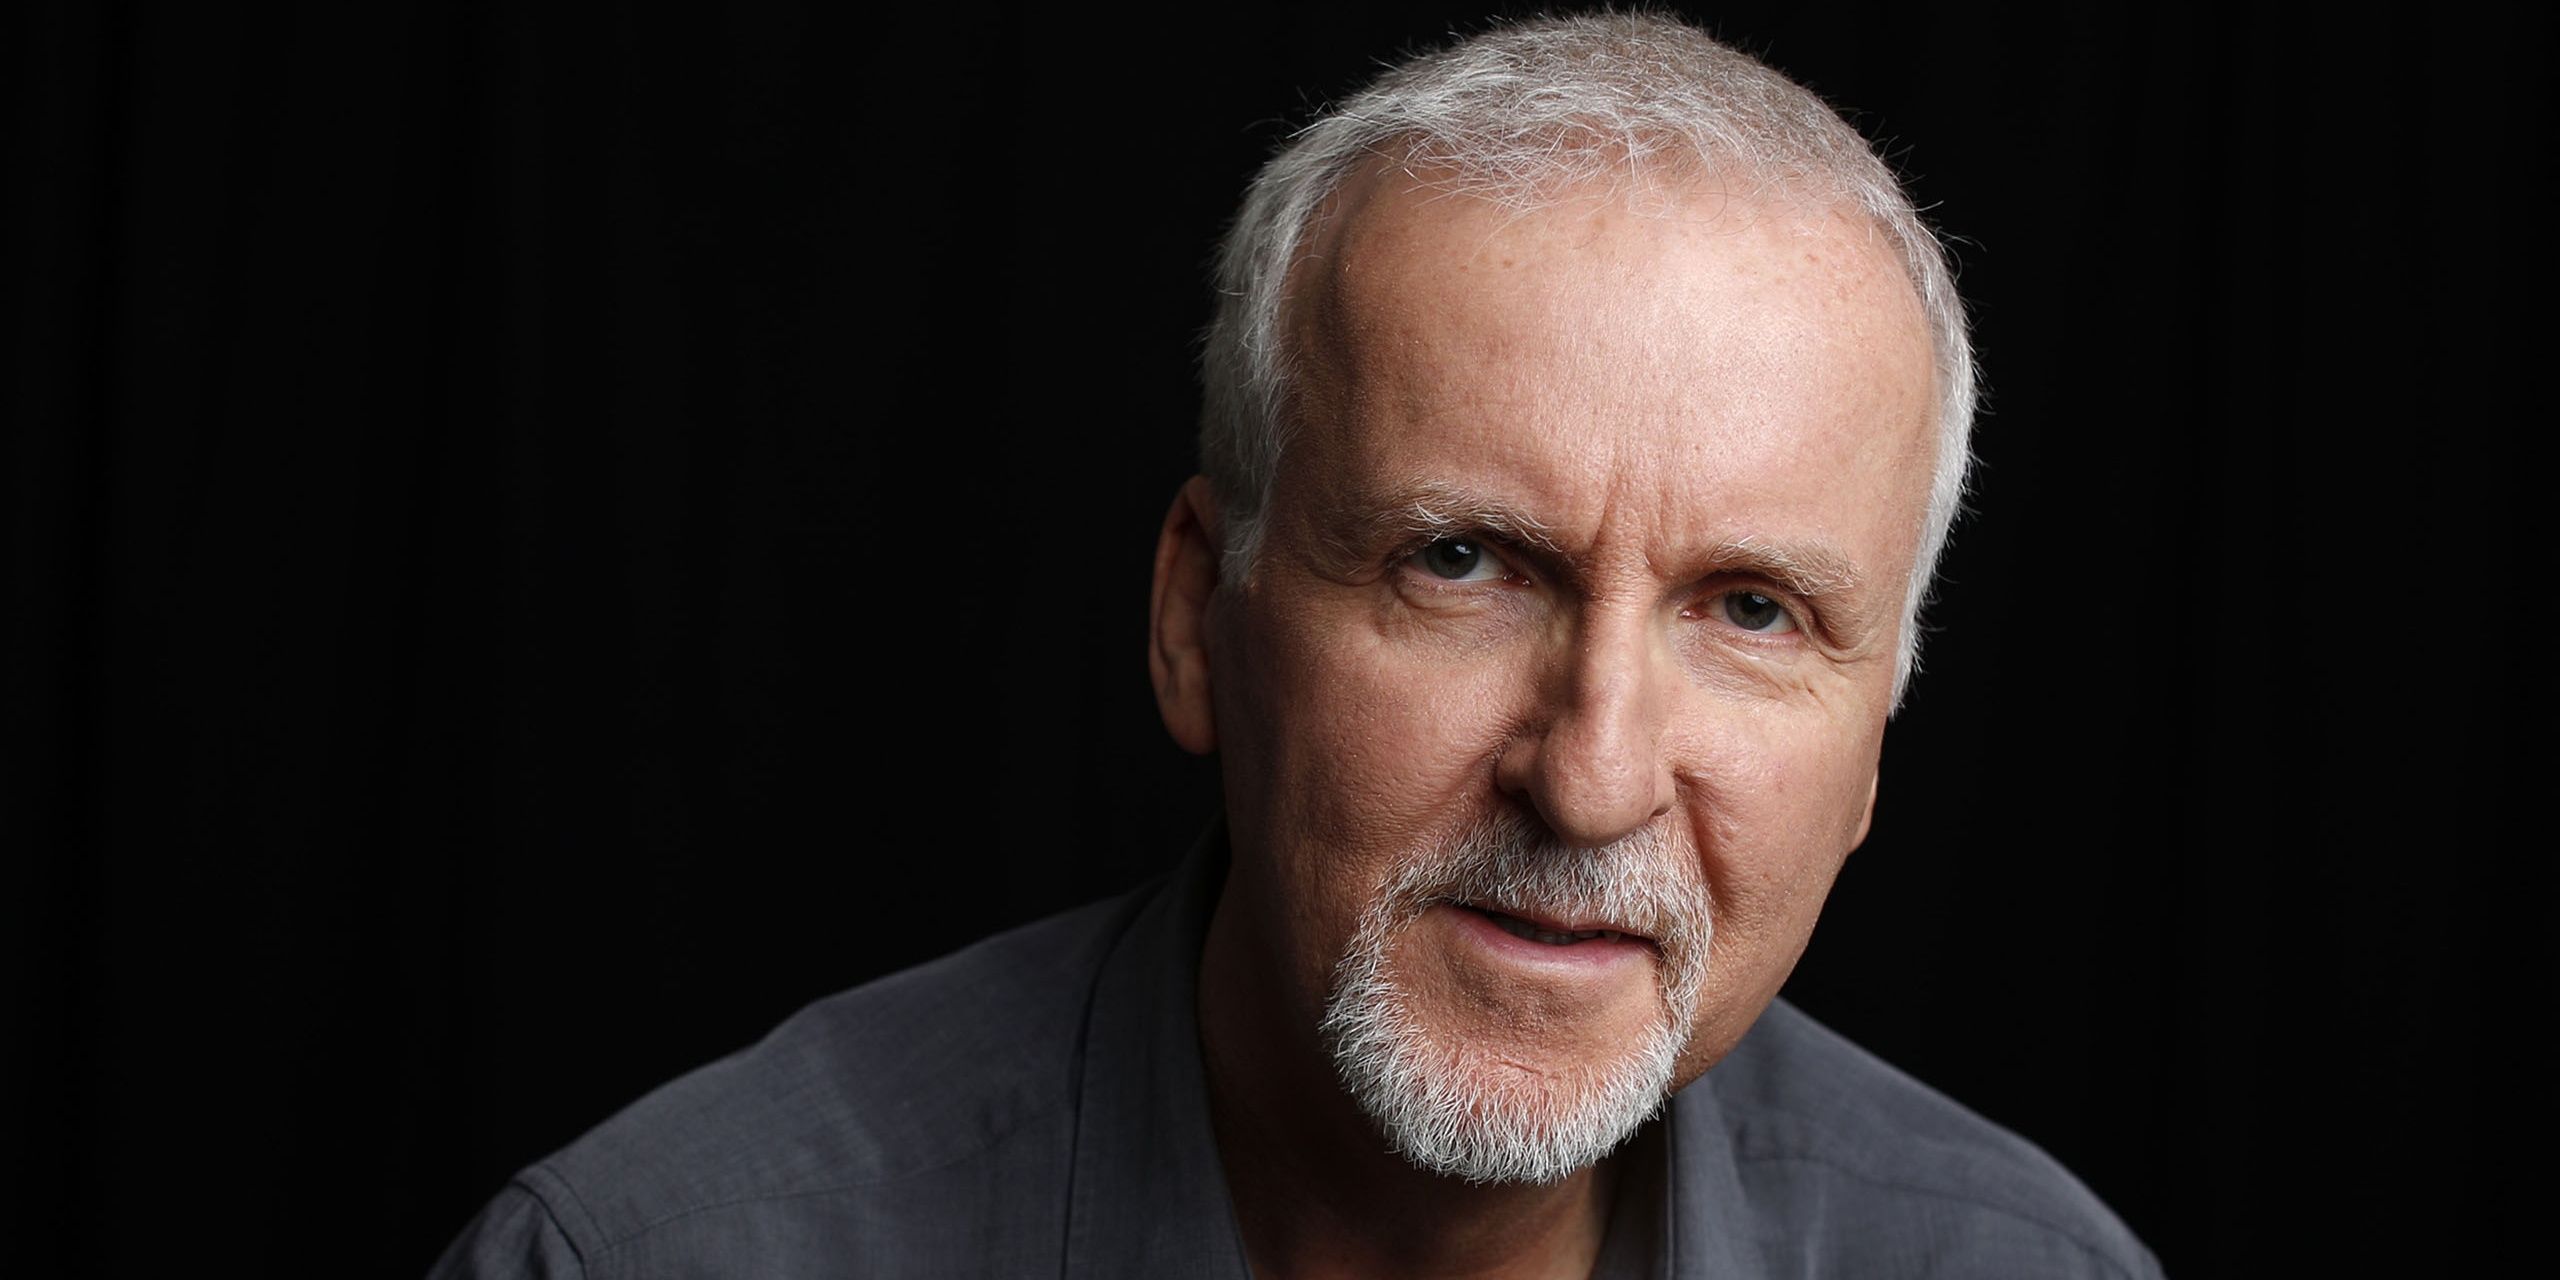 An image of James Cameron on a dark background